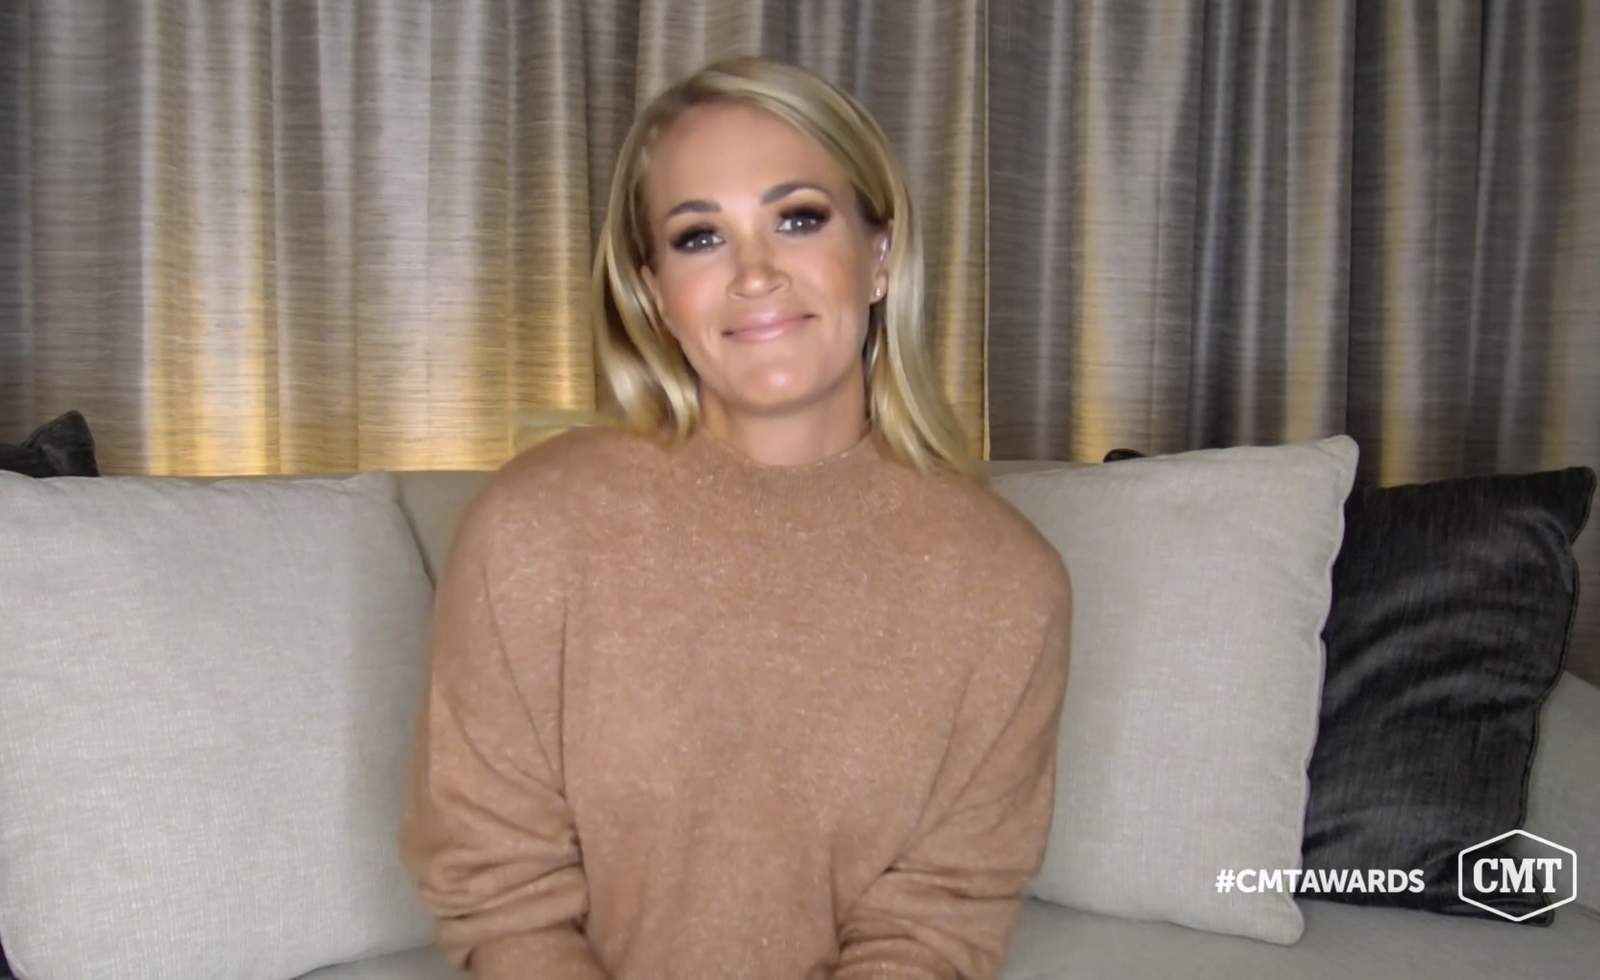 Carrie Underwood adds to CMT Music Awards haul